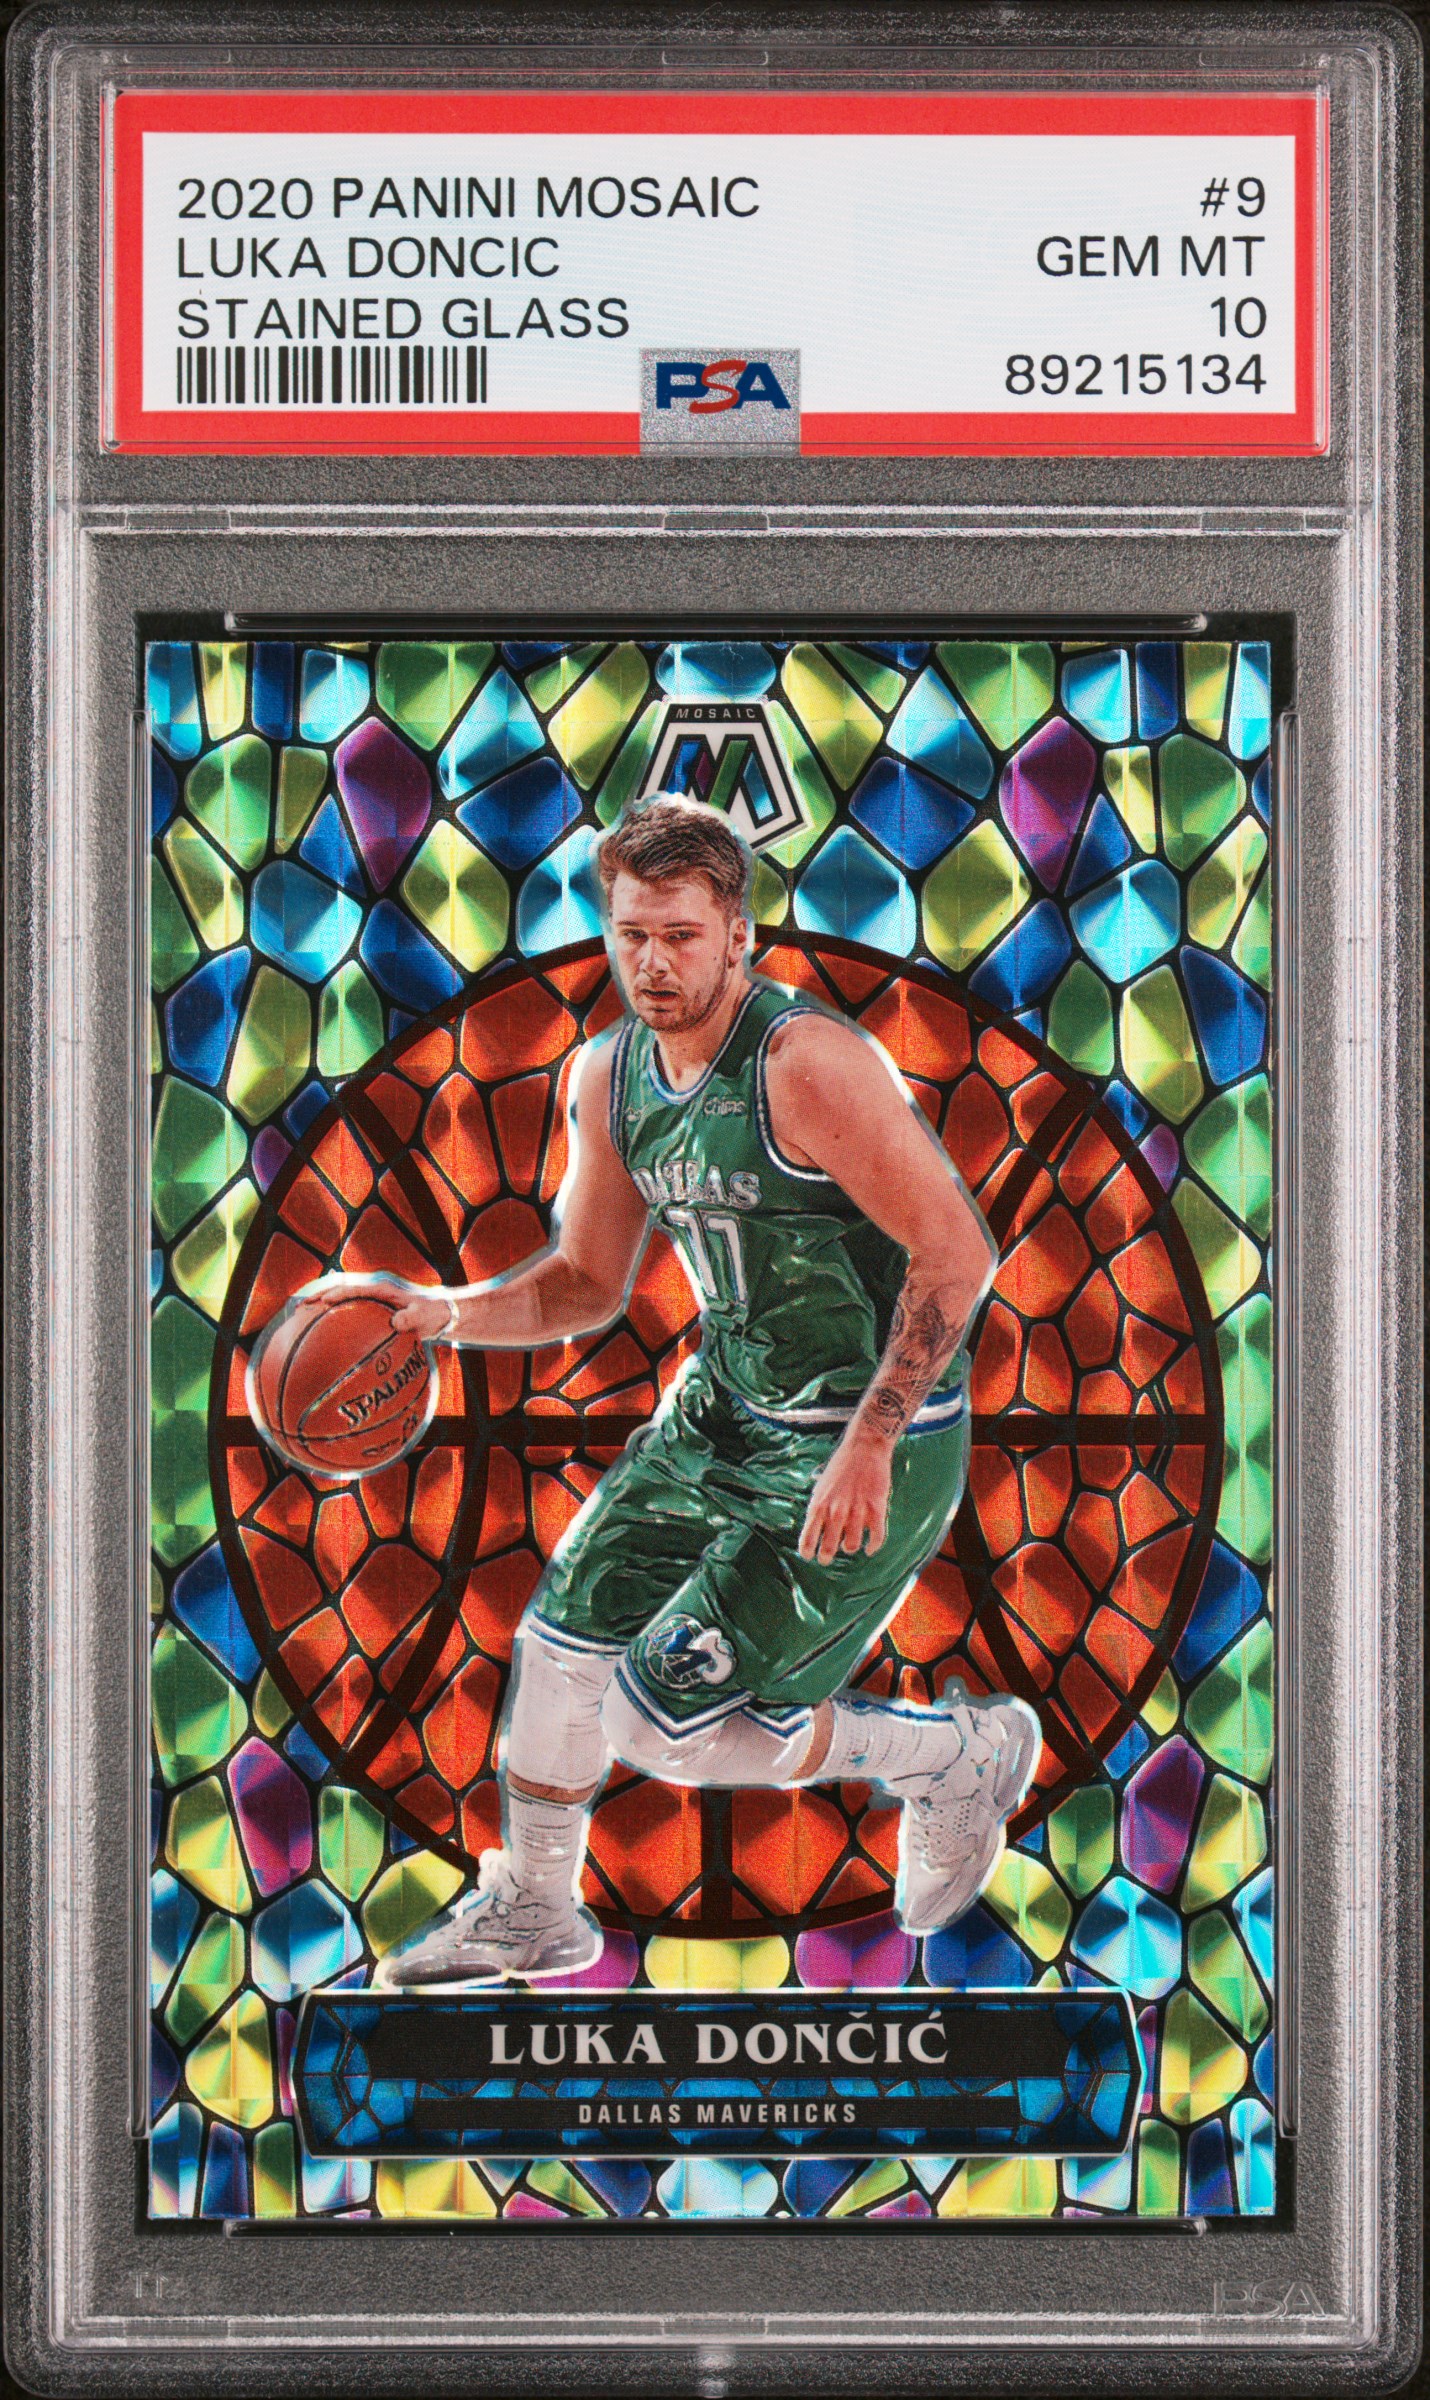 2020-21 Panini Mosaic Stained Glass #9 Luka Doncic – PSA GEM MT 10